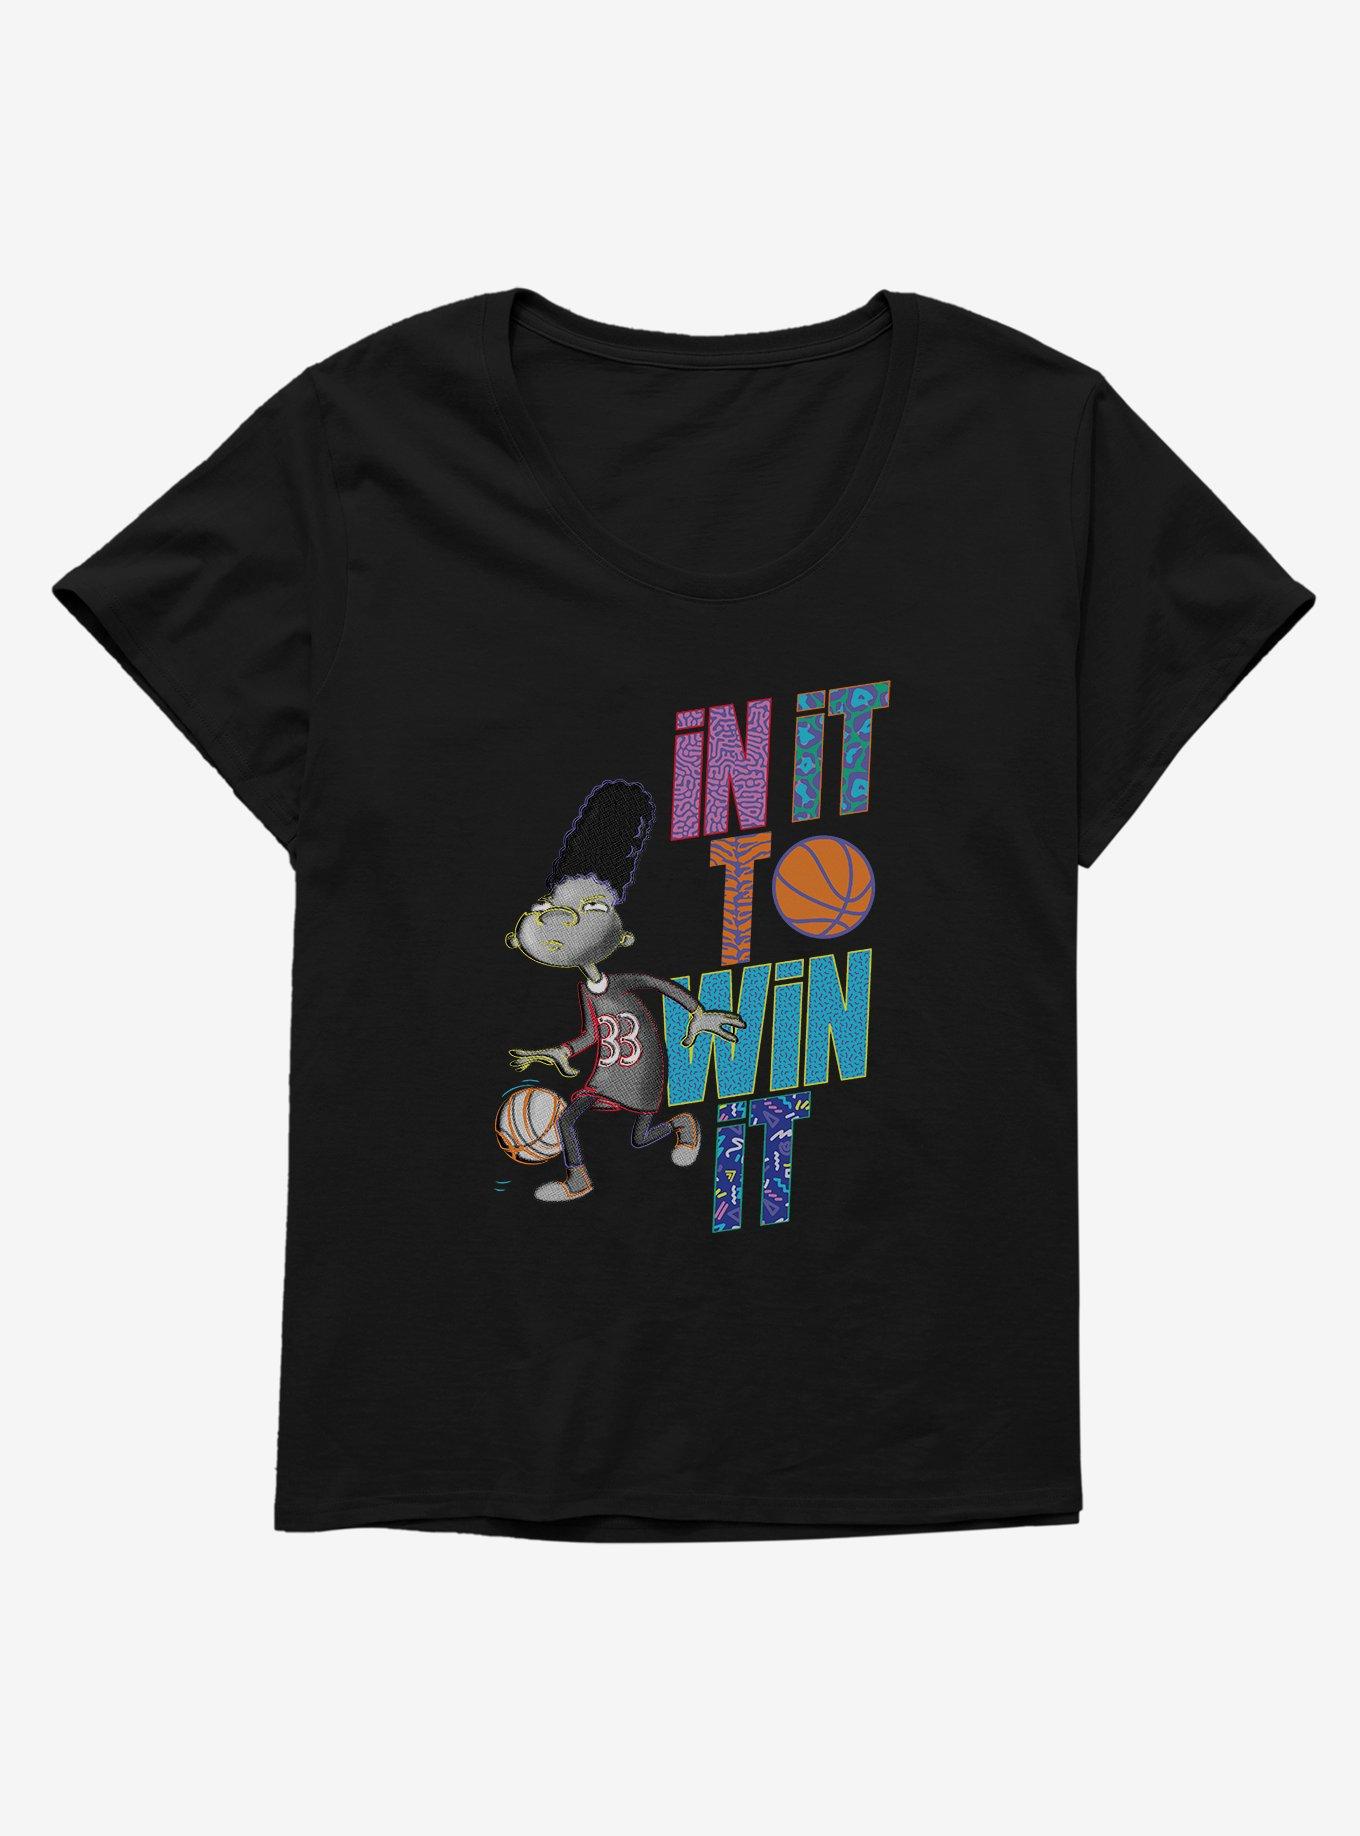 Hey Arnold! It To Win Girls T-Shirt Plus